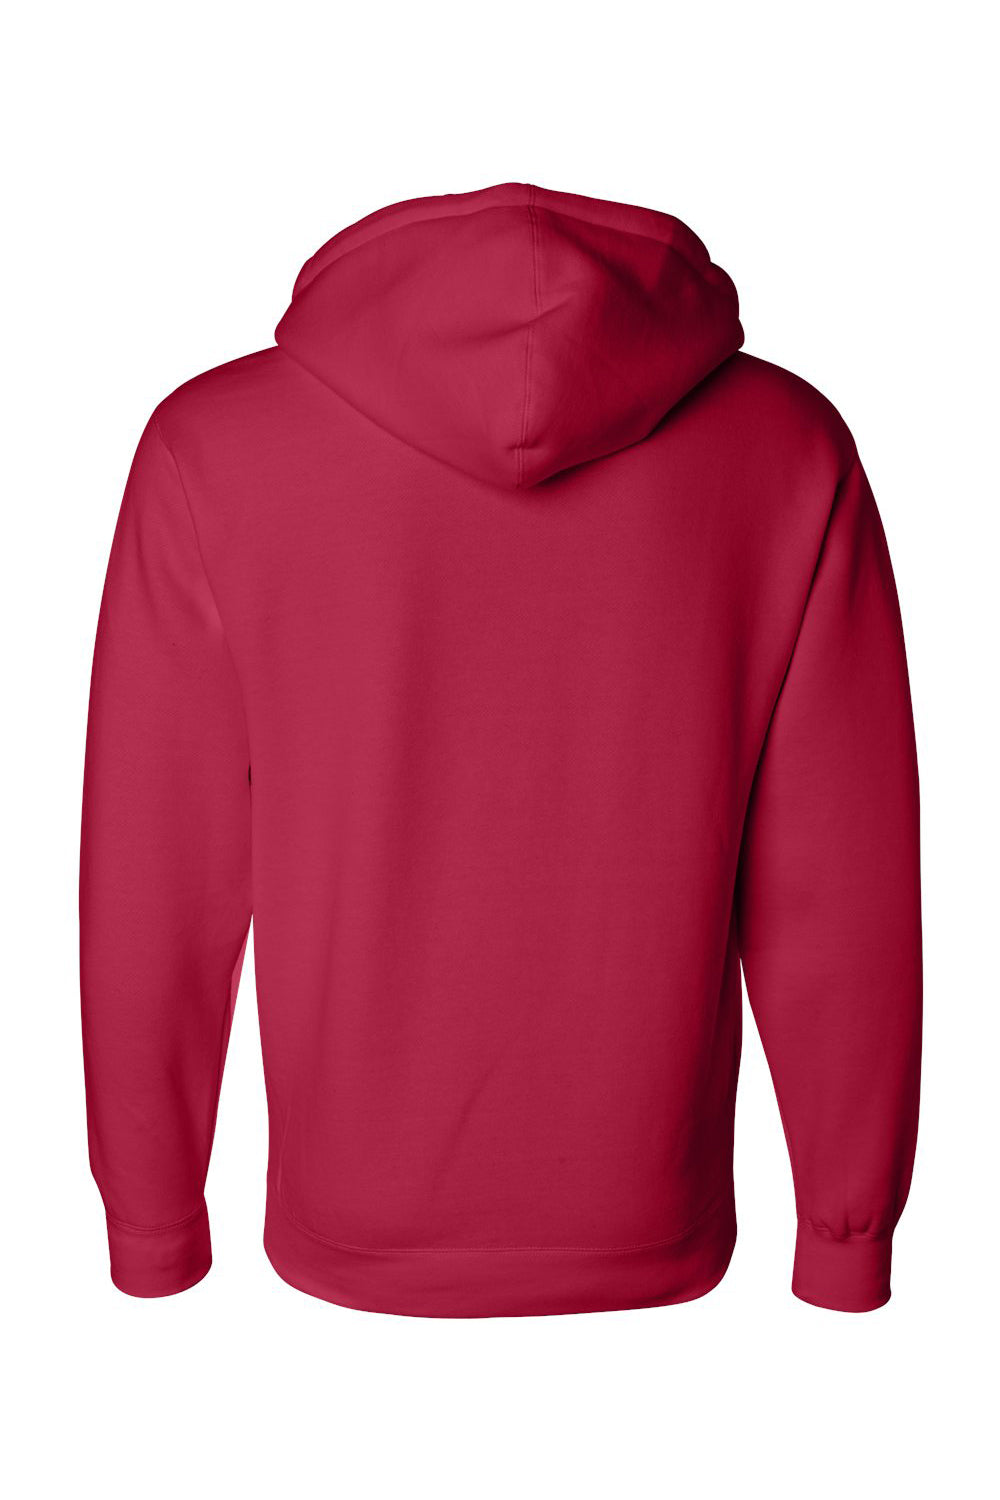 Independent Trading Co. IND4000 Mens Hooded Sweatshirt Hoodie Red Flat Back